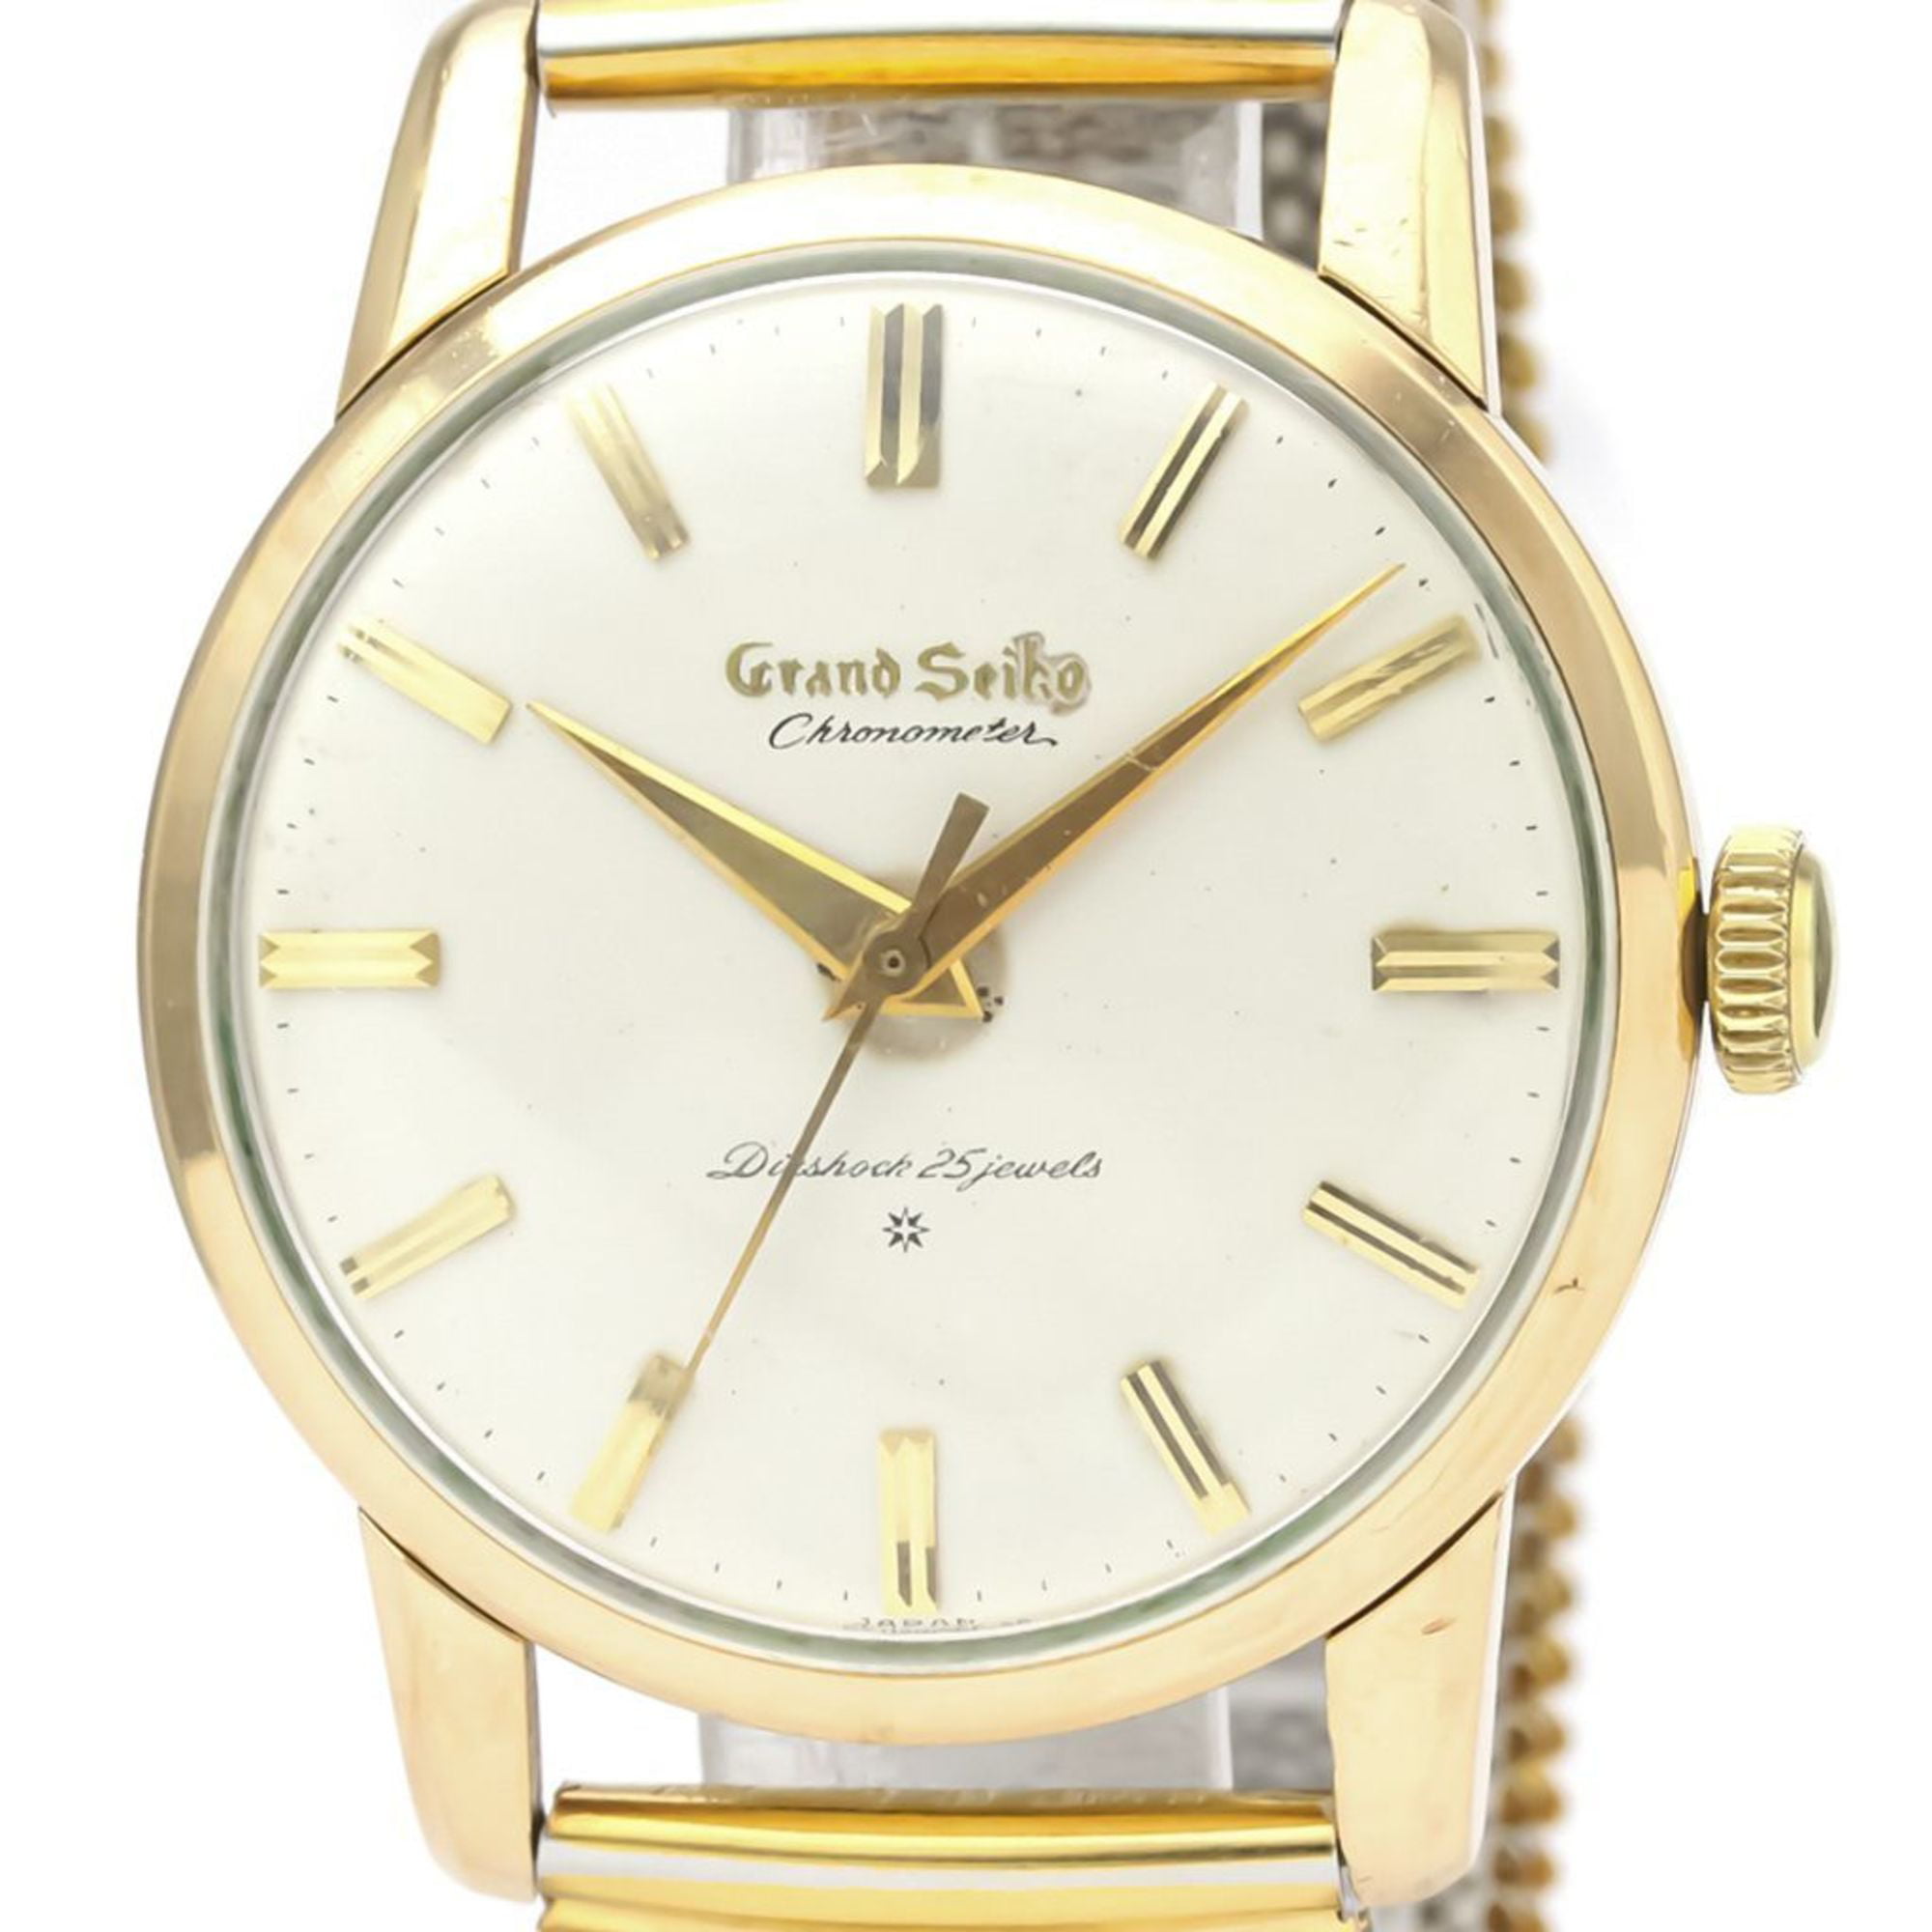 Buy Used Seiko Grand Seiko Mechanical Gold Plated Mens Dress Watch J14070  Online at Lowest Price in Ubuy Nepal. 914137457